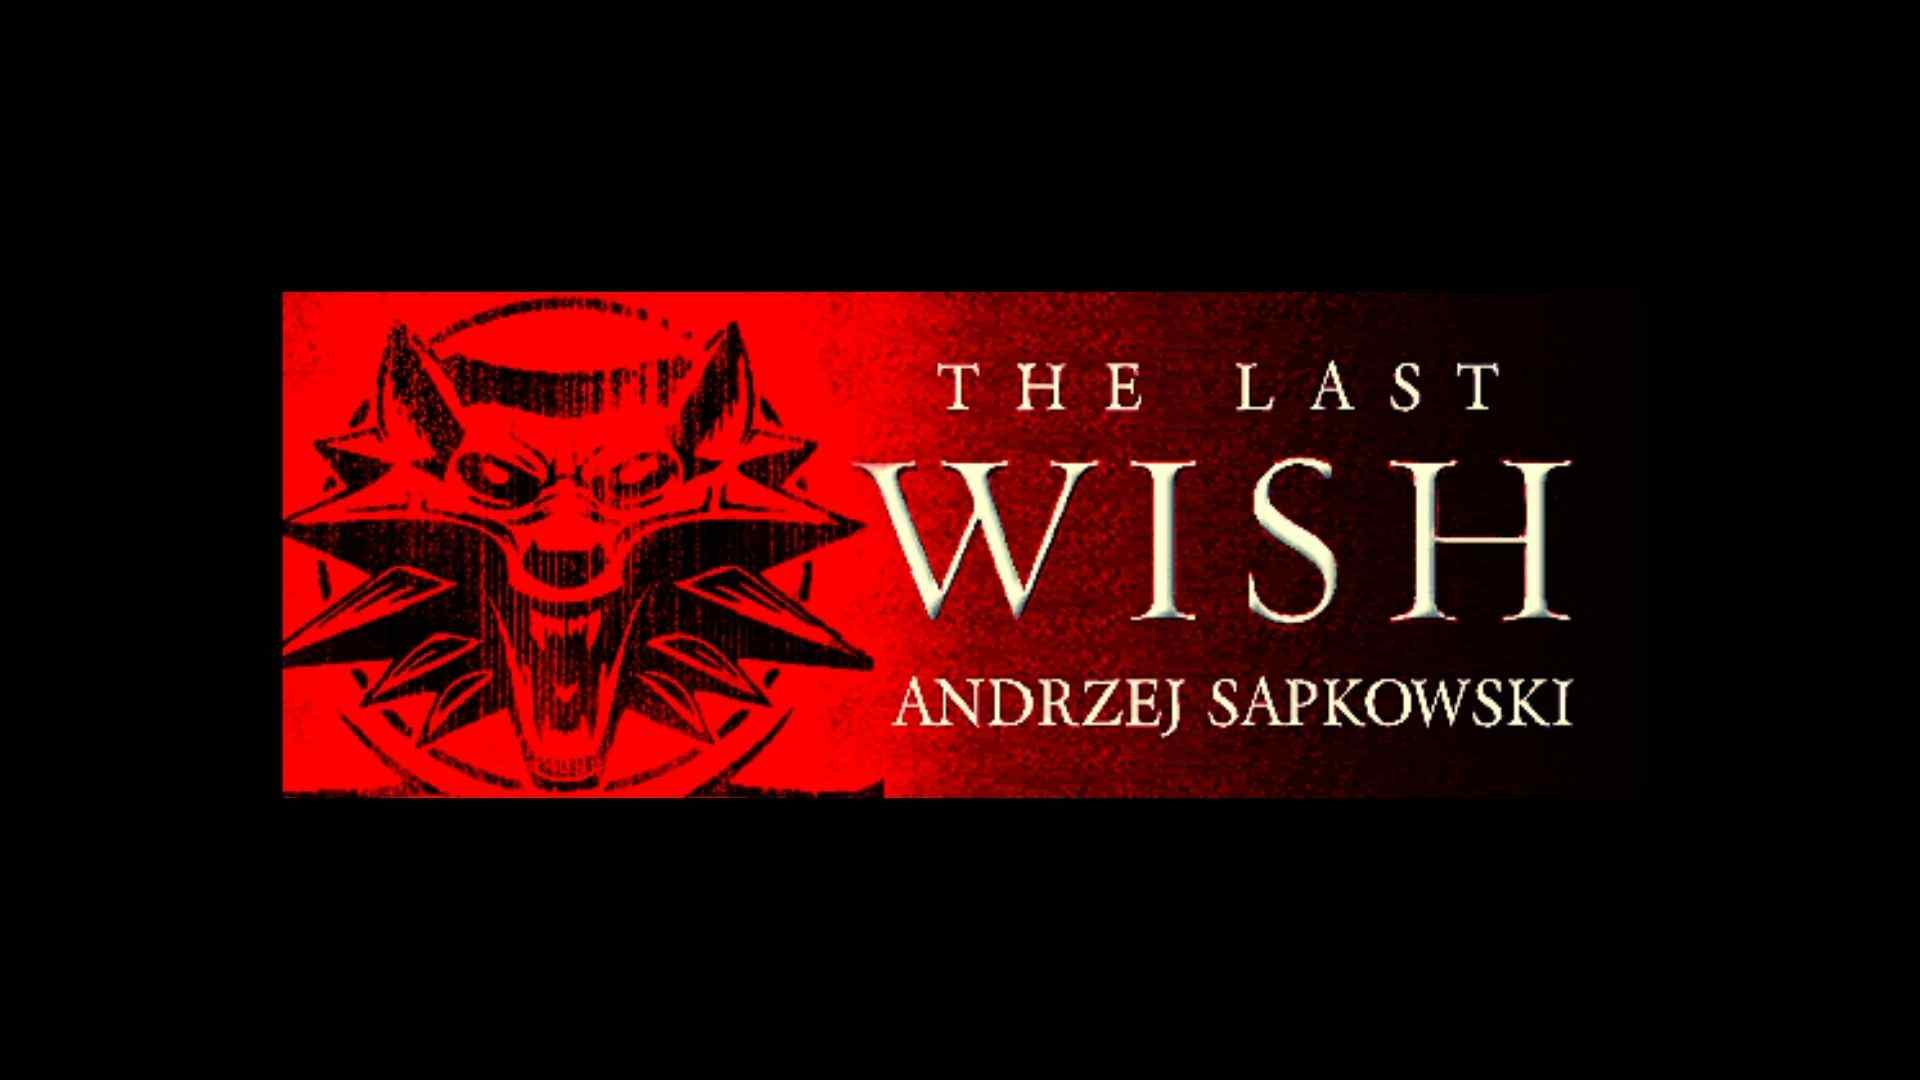 The Last Wish Parents Guide | The Last Wish Age Rating (1993 Book)